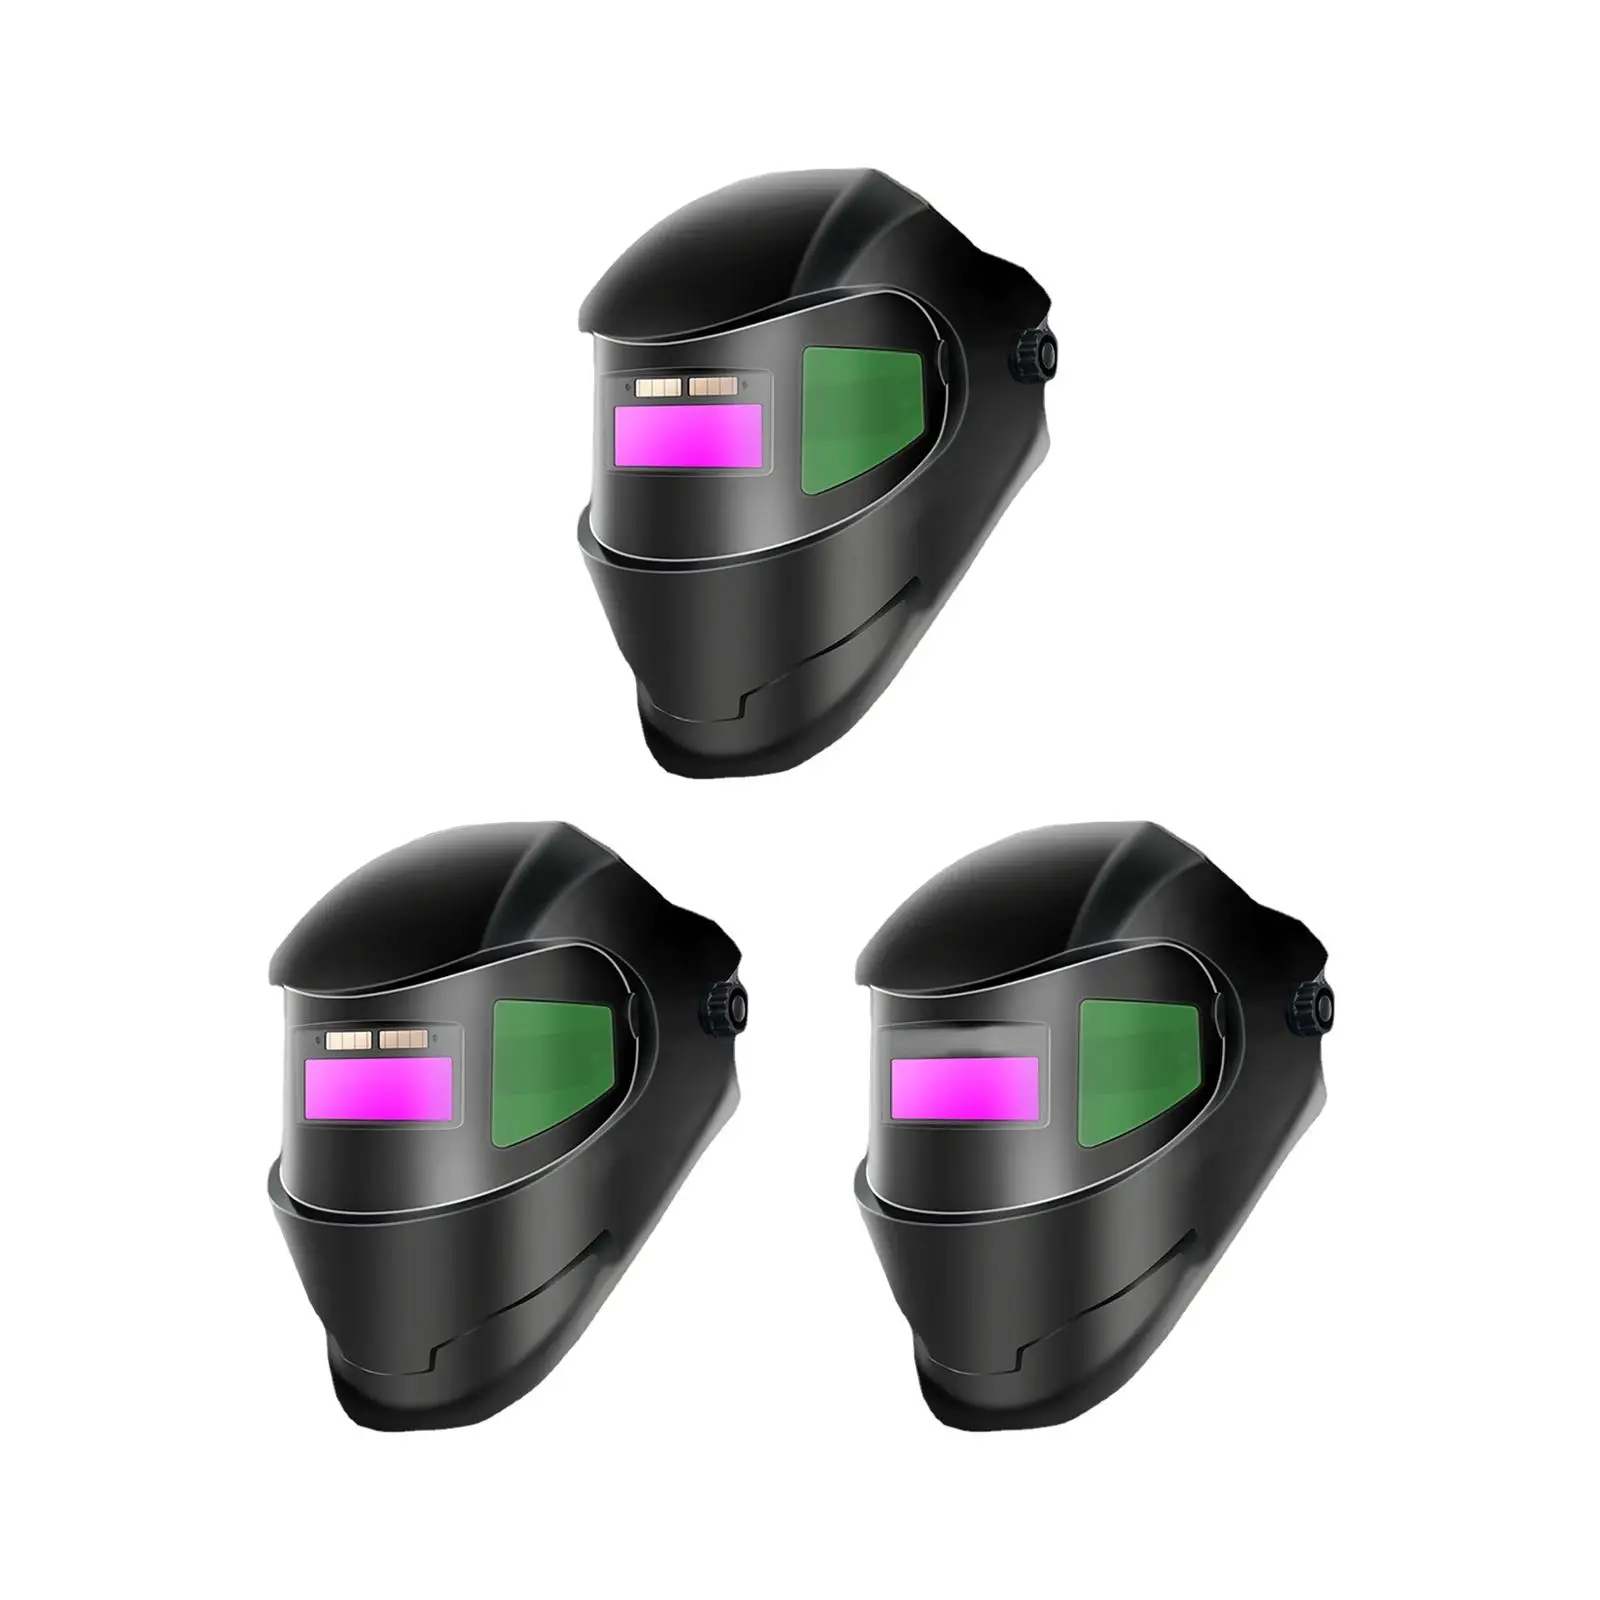 Solar Powered Auto Darkening Welding Helmets Large Viewing with Side View Panoramic Flip up Welding Face Cover for TIG Mig Weld